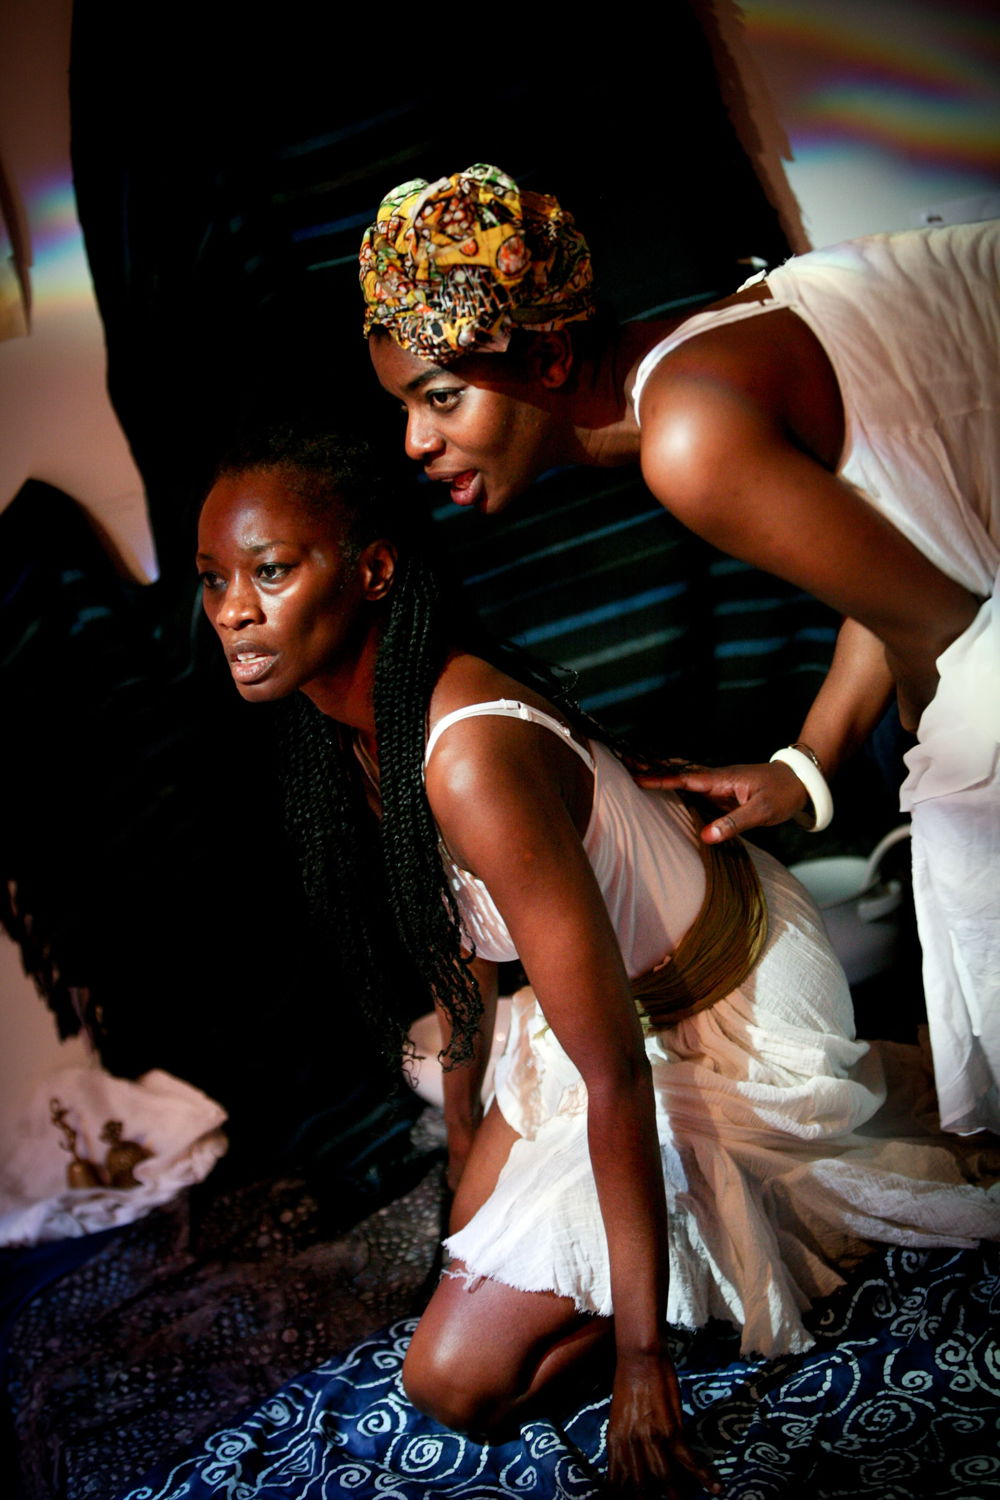 Two black women, both wearing white dresses, pose on a stage covered in colorful, patterned textiles. One woman leans over the other, who is kneeling, and seems to whisper in her ear.